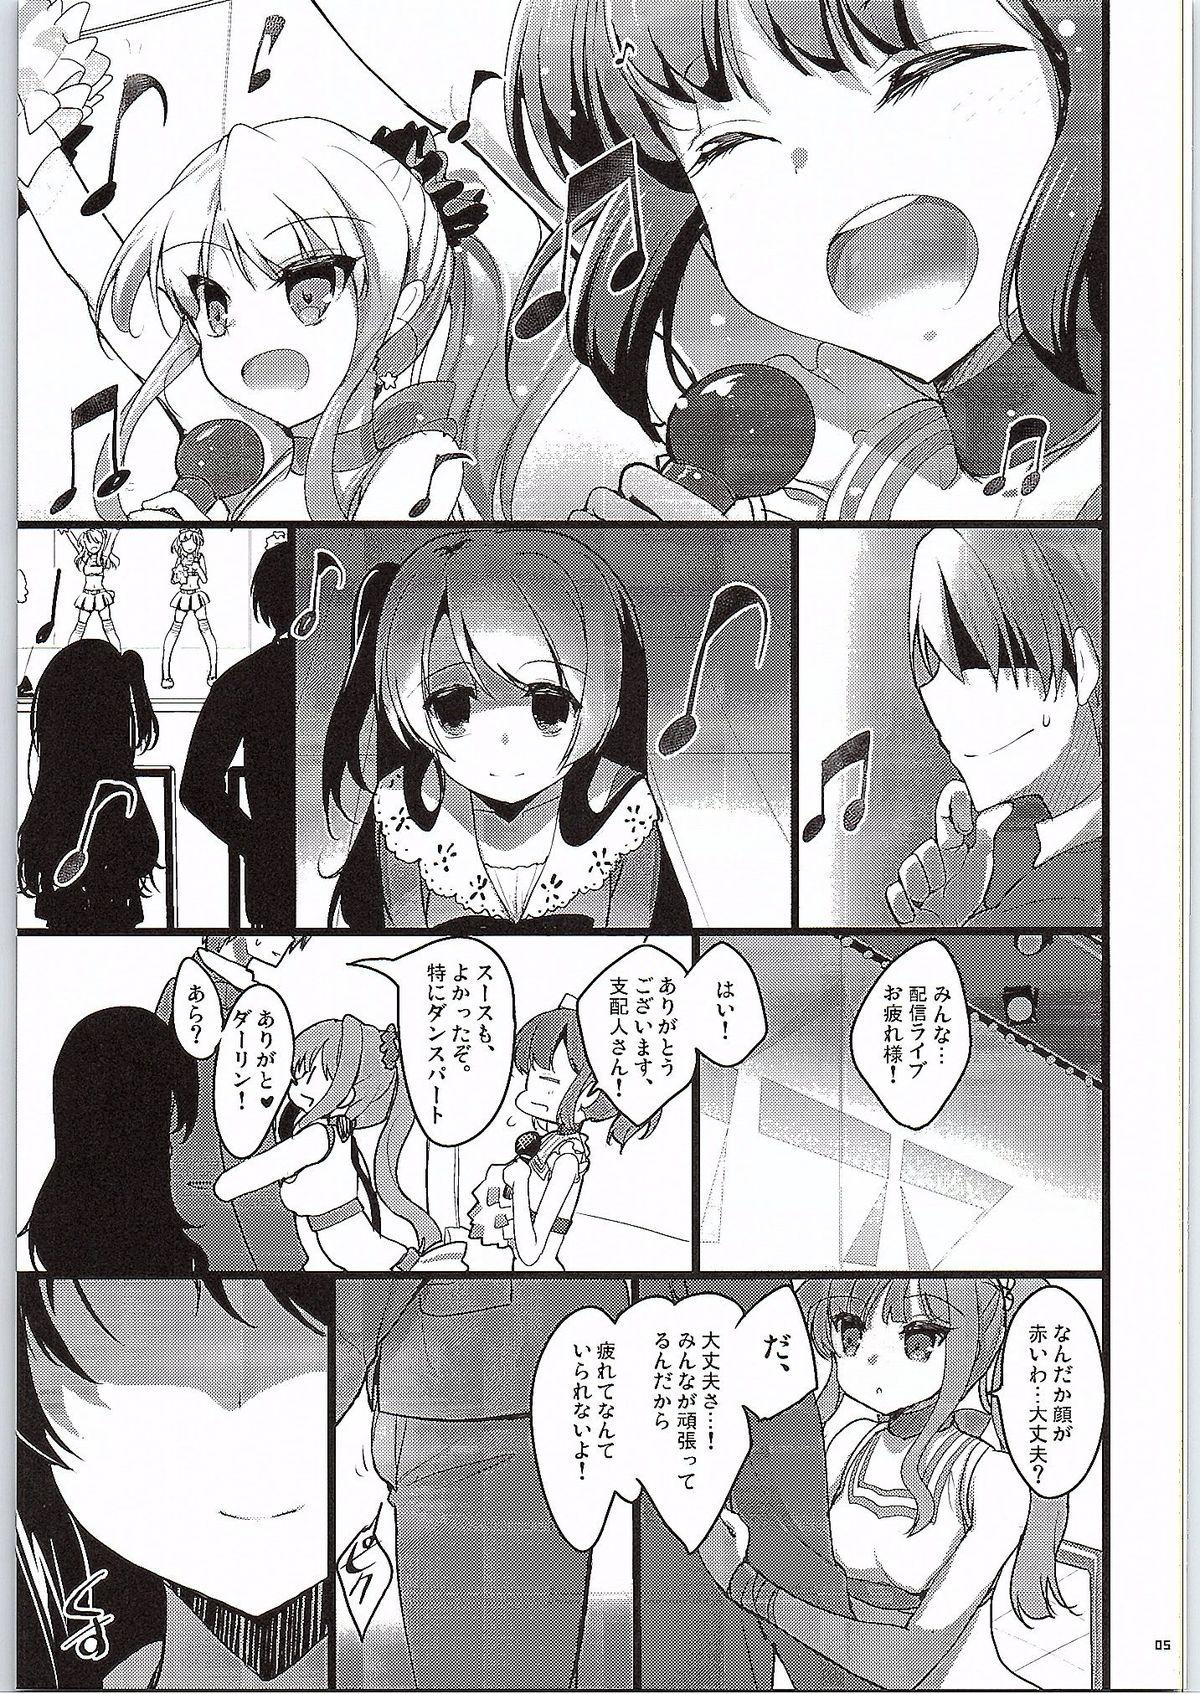 Online GOOD NIGHTMARE - Tokyo 7th sisters Face - Page 4